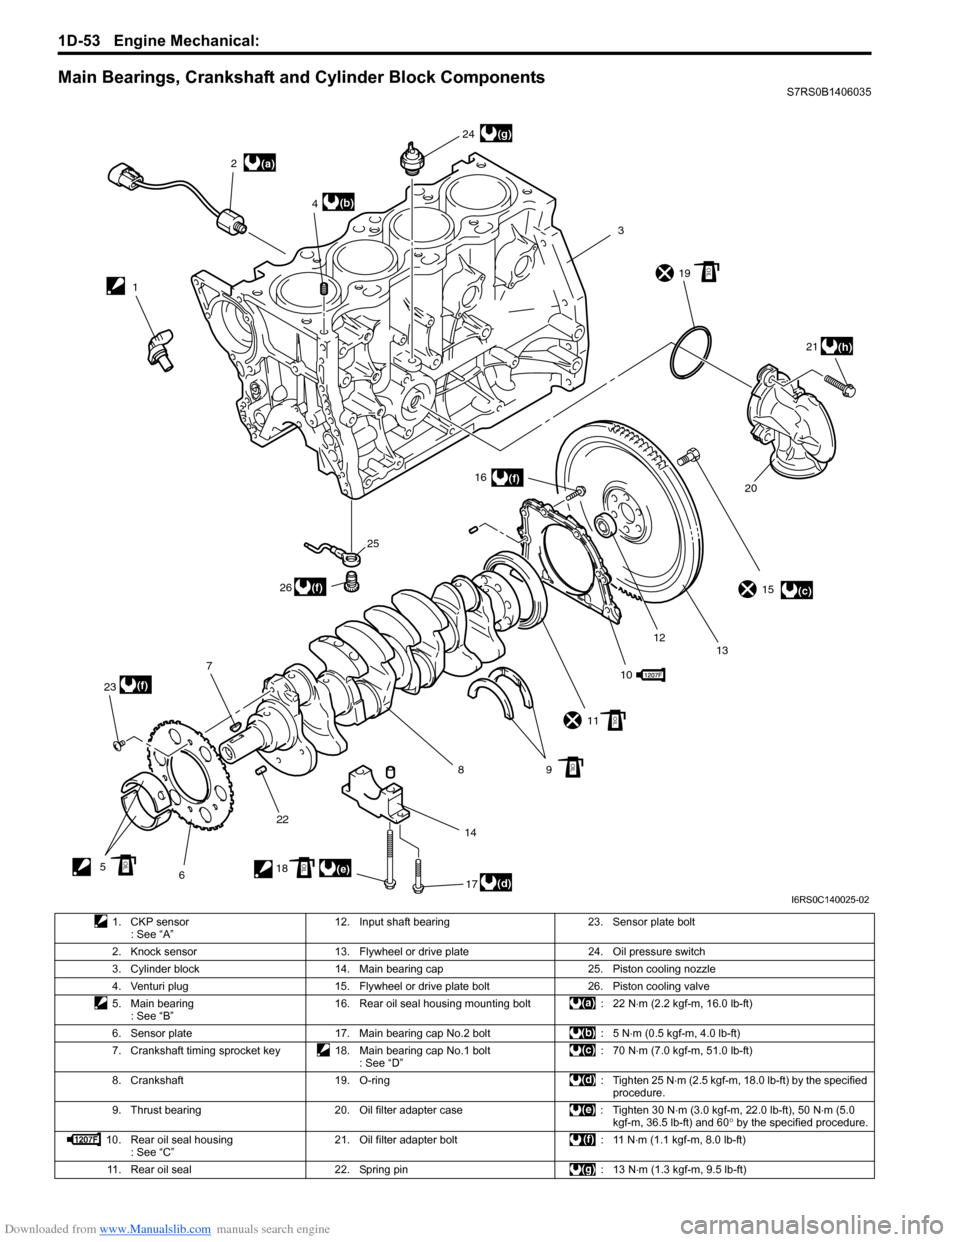 SUZUKI SWIFT 2005 2.G Service User Guide Downloaded from www.Manualslib.com manuals search engine 1D-53 Engine Mechanical: 
Main Bearings, Crankshaft and Cylinder Block ComponentsS7RS0B1406035
(a)
(c)
(d)(e)
(b)
(f)
(f)
(f)
(g)
(h)
12
3
4
5 